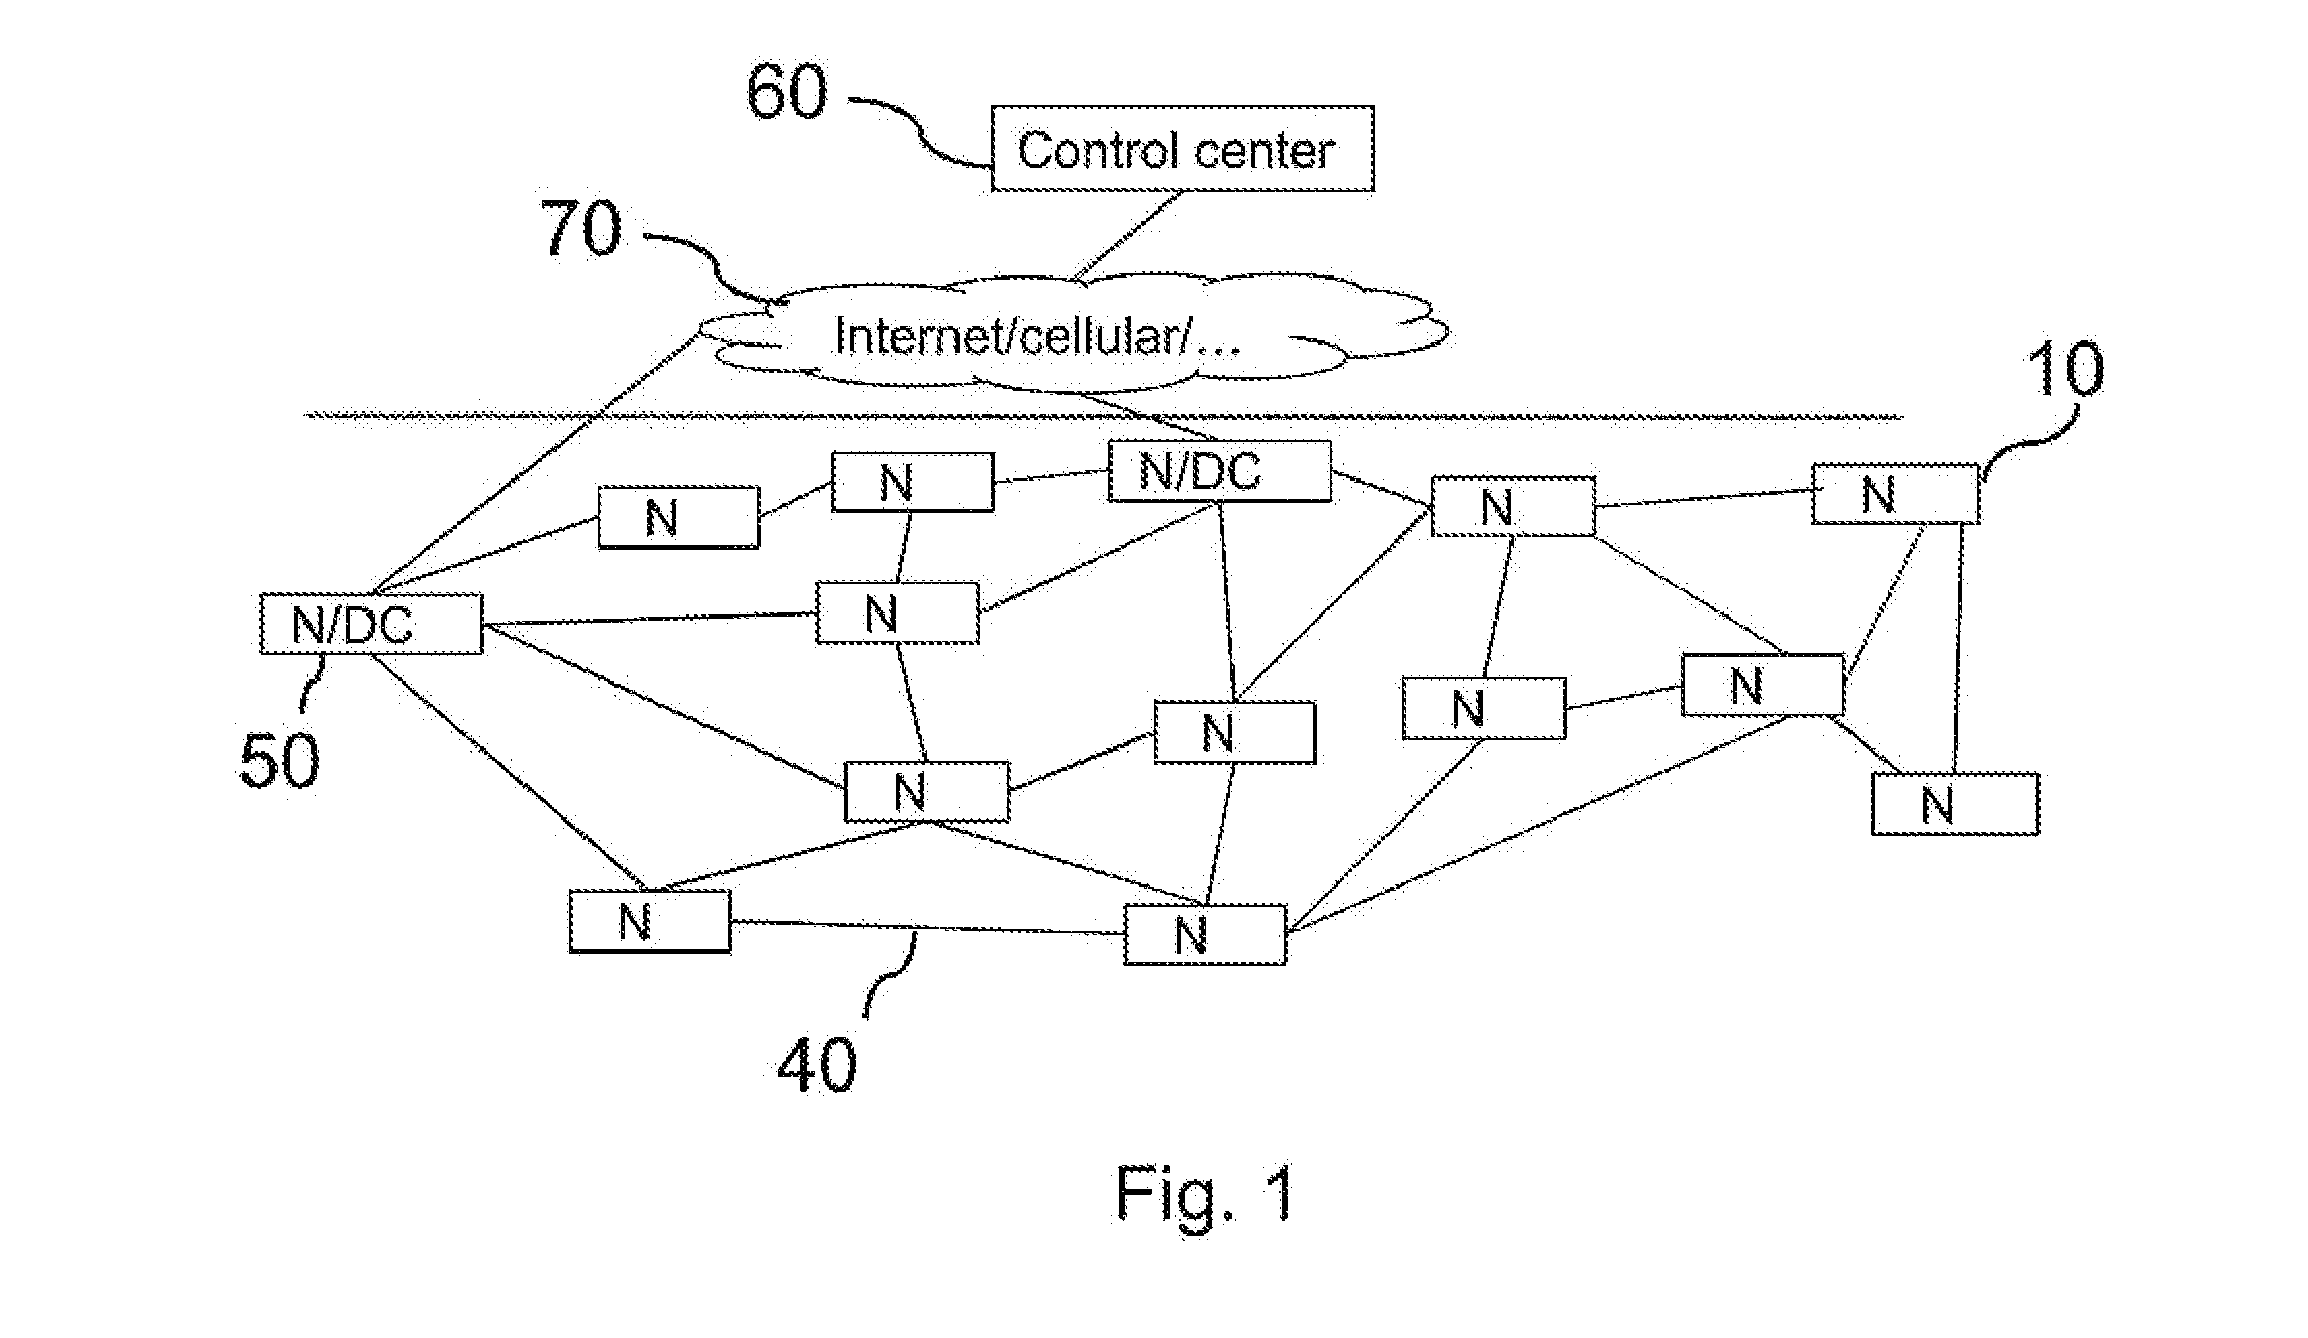 System and method for optimizing data transmission to nodes of a wireless mesh network